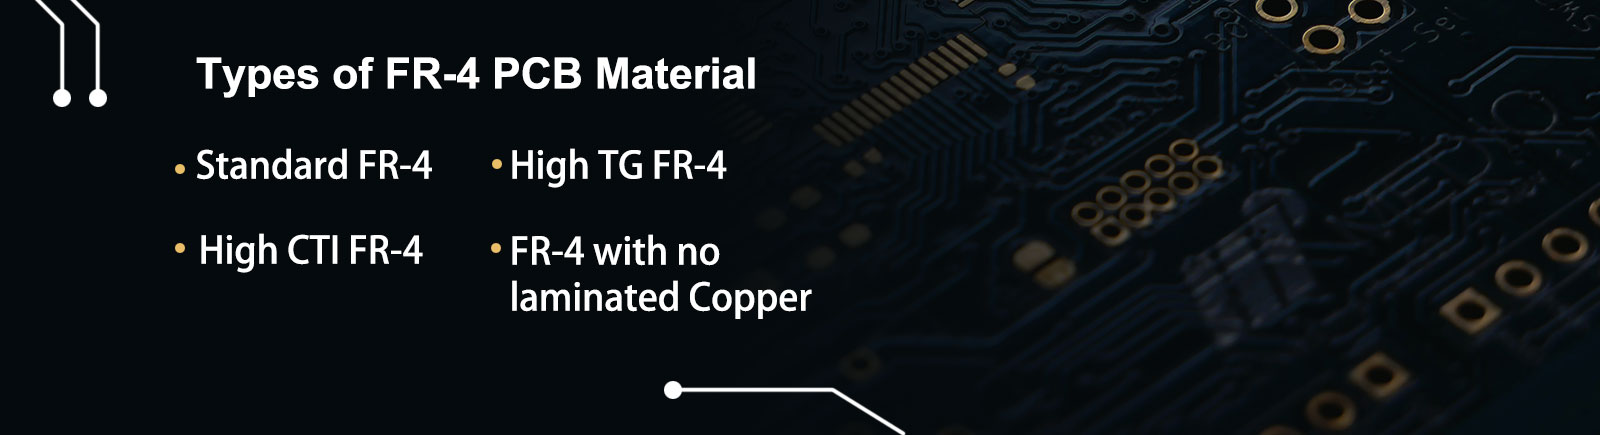 Types of FR-4 PCB Material